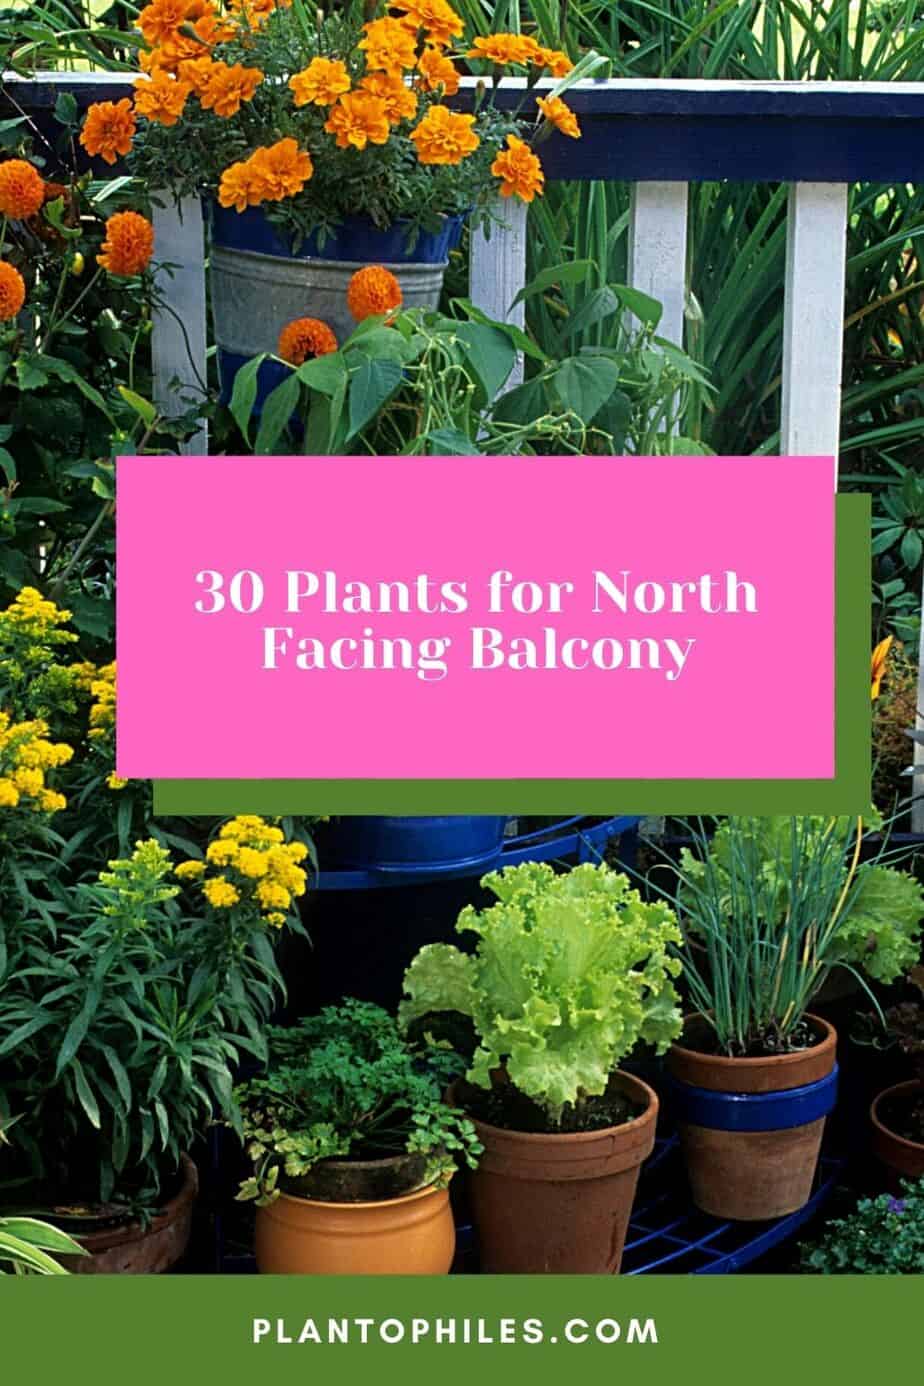 30 Plants for North Facing Balcony